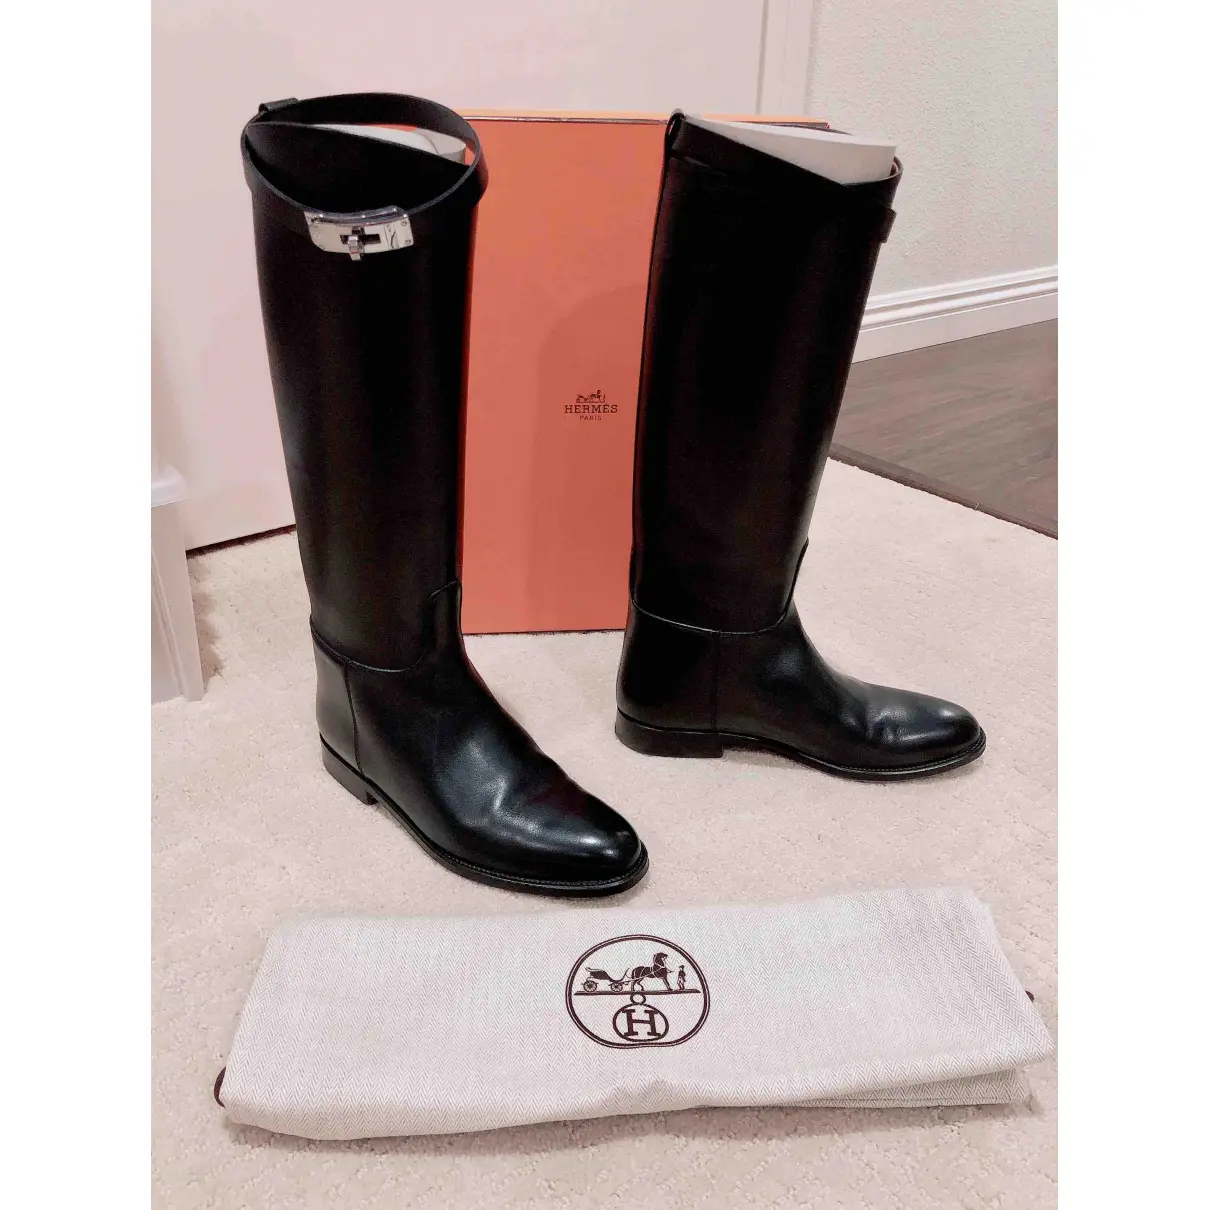 Buy Hermès Jumping leather riding boots online